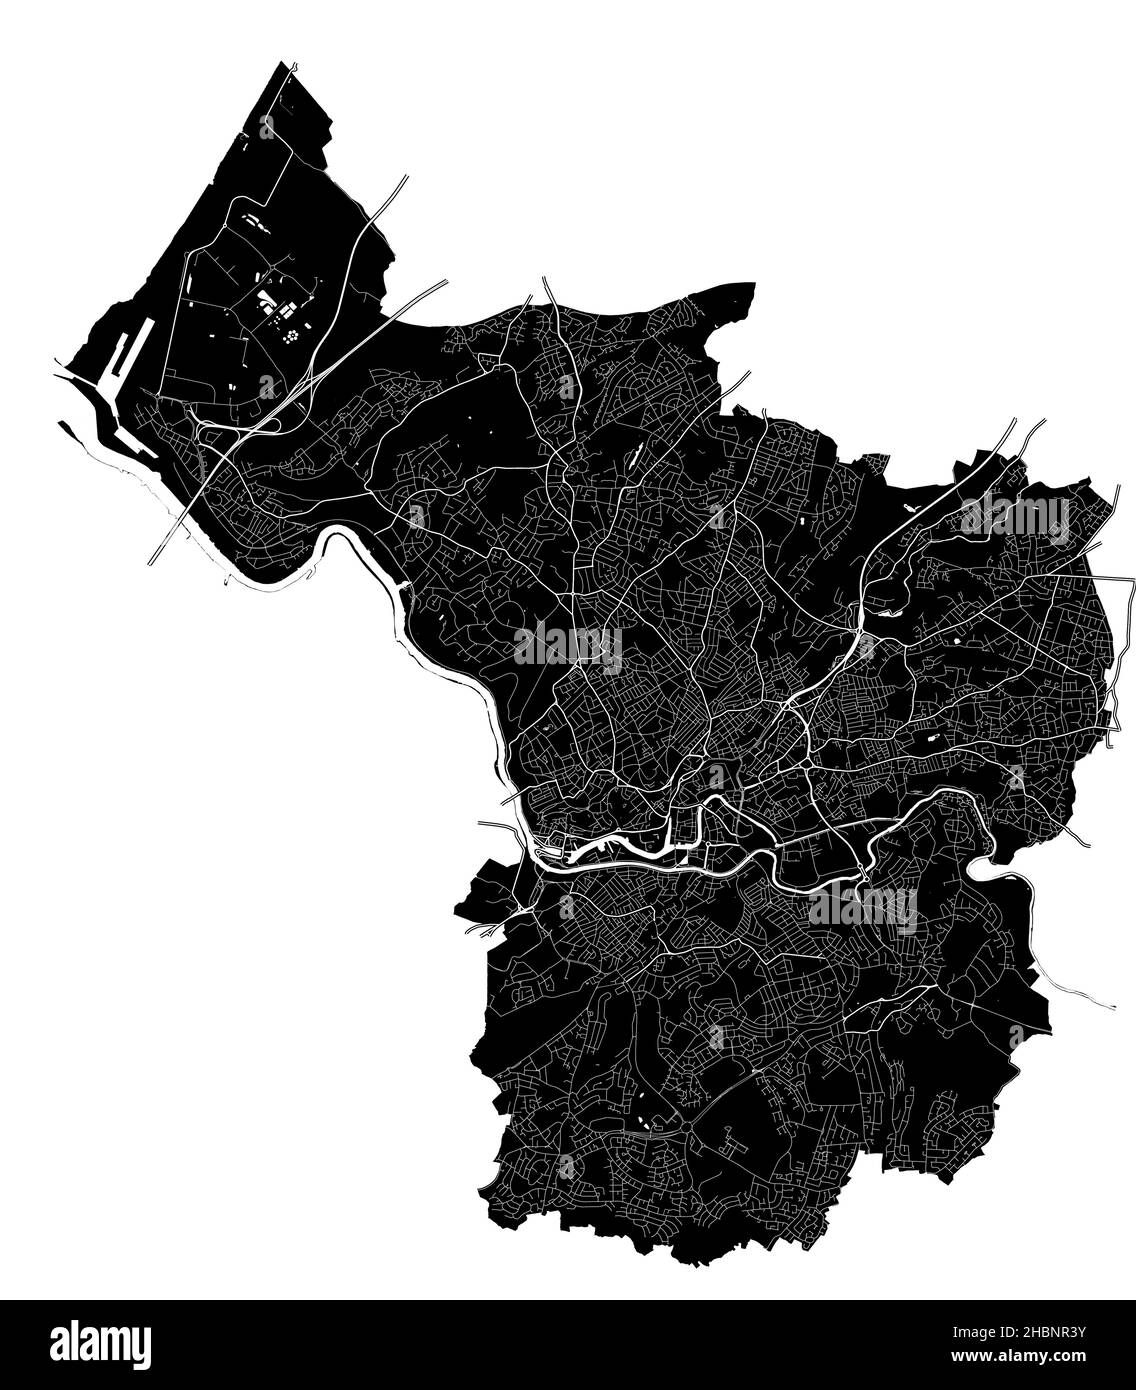 Bristol, England, high resolution vector map with city boundaries, and editable paths. The city map was drawn with white areas and lines for main road Stock Vector